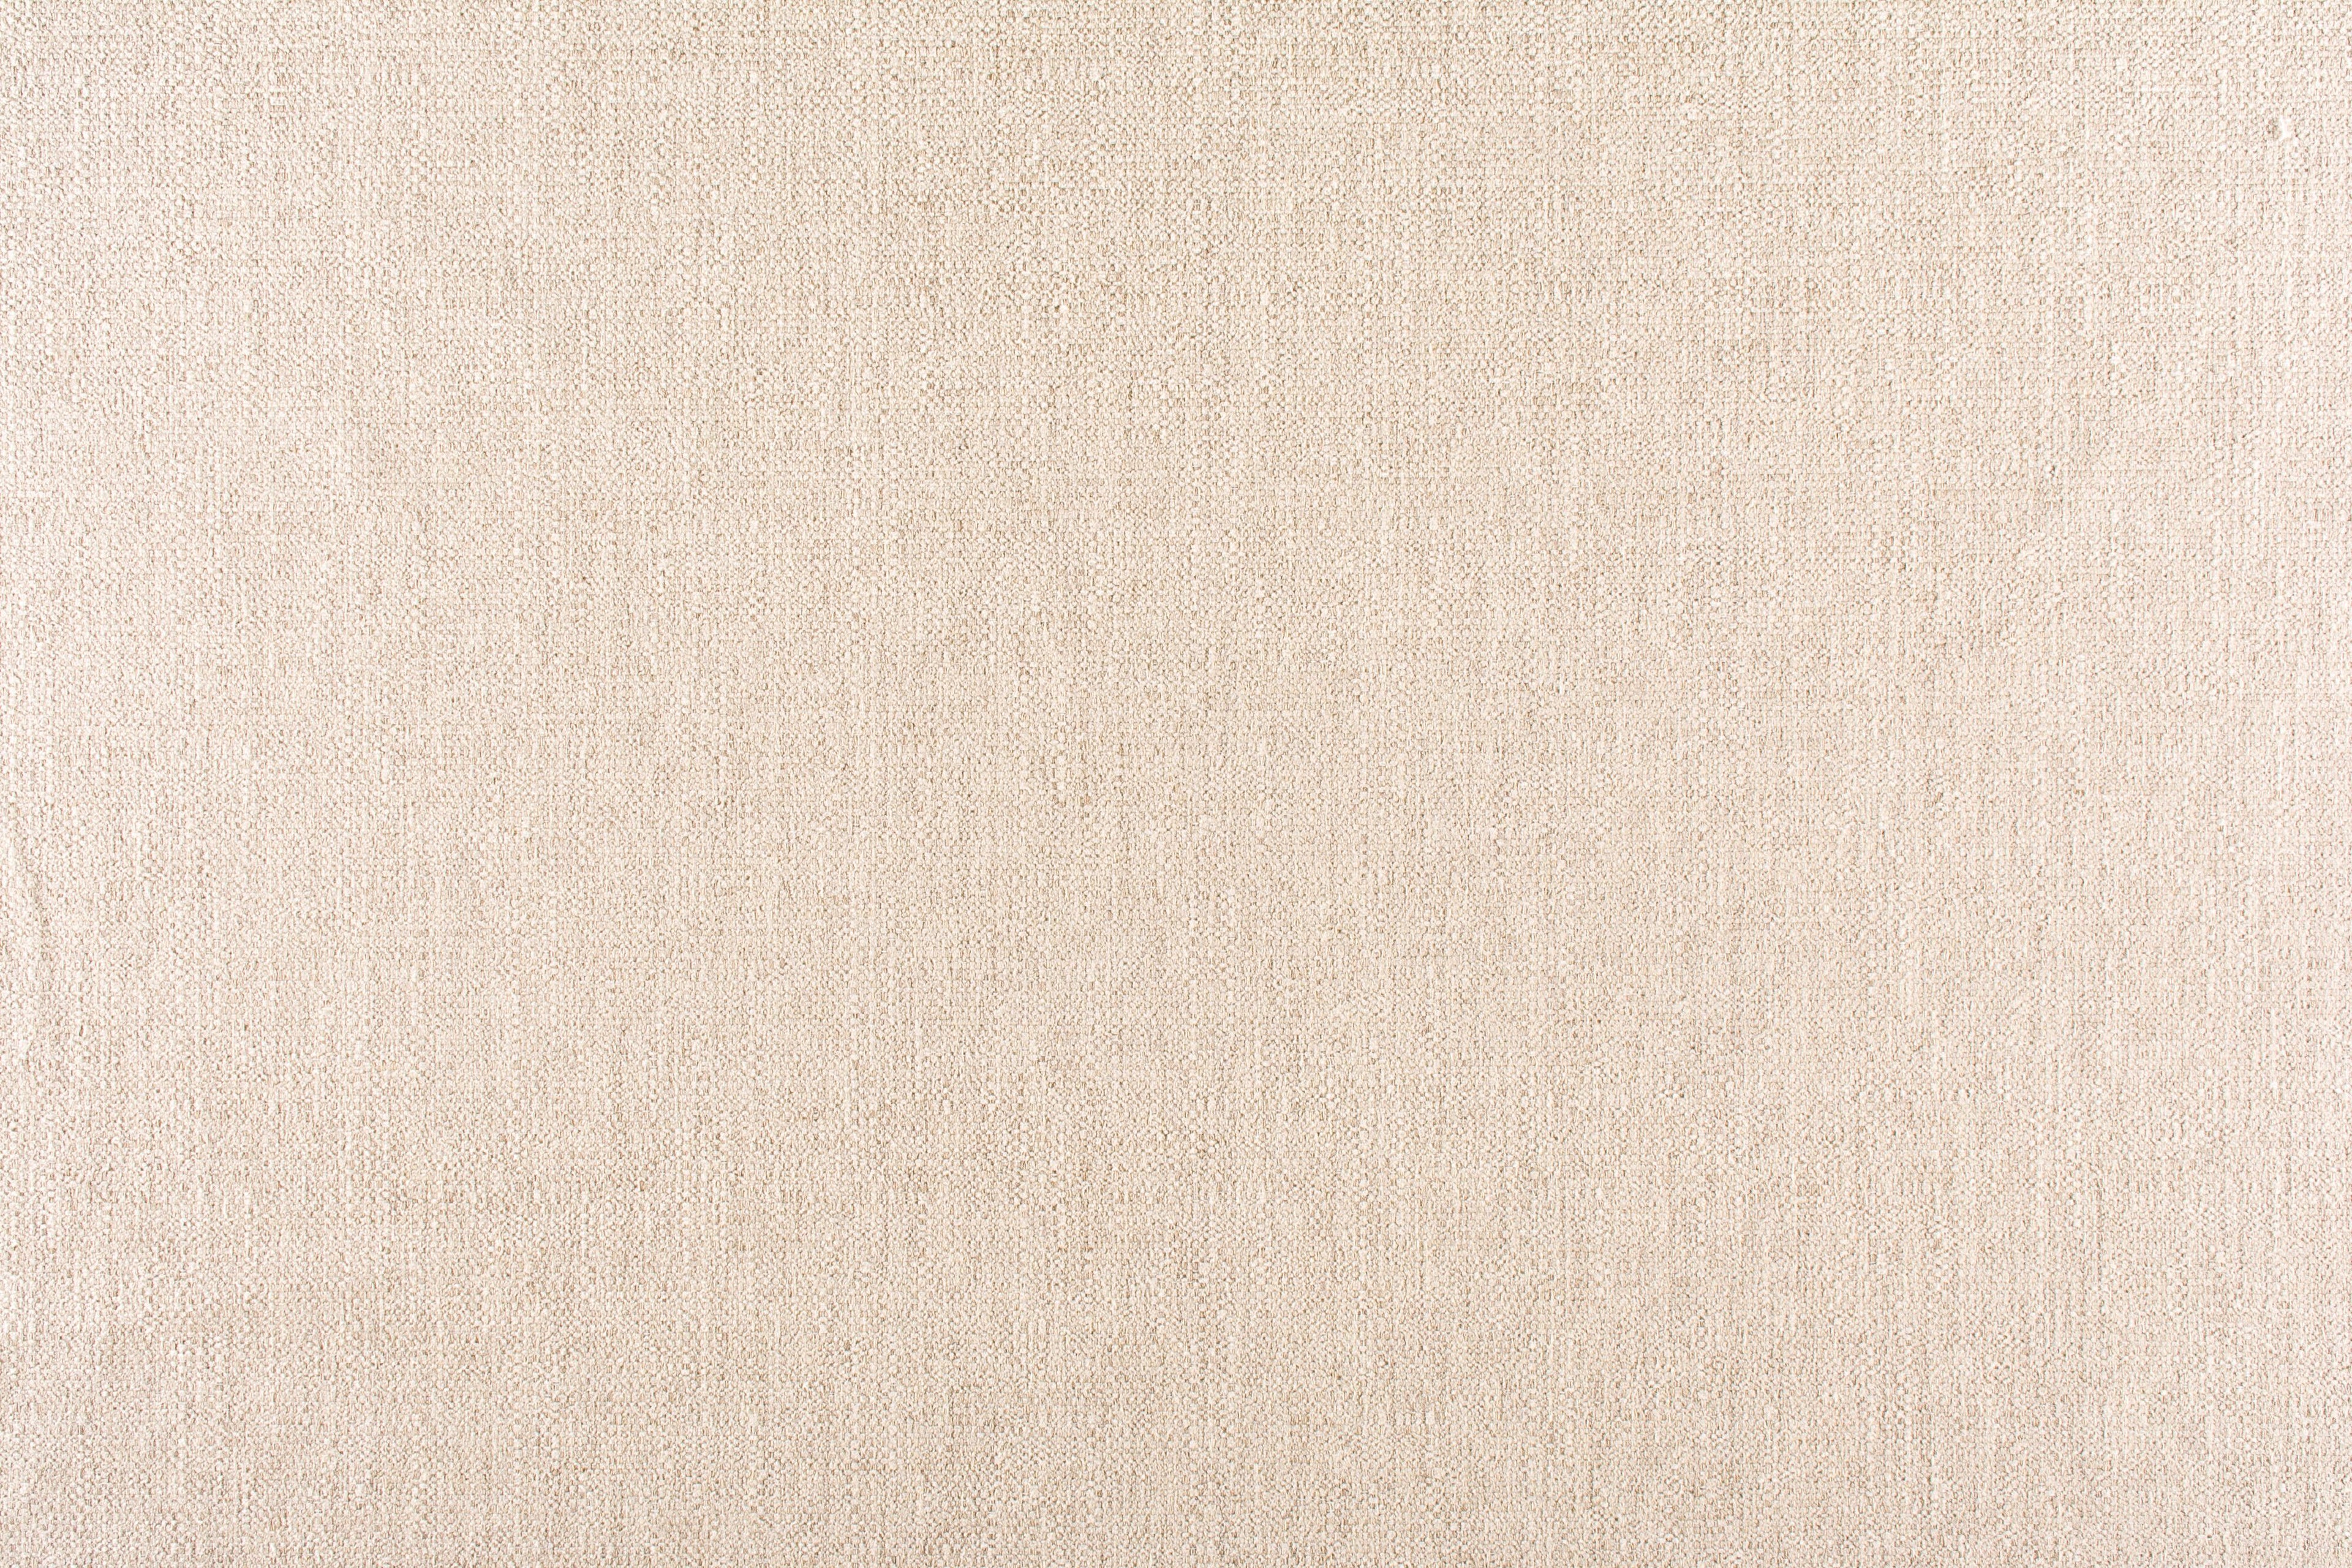 Creekstone Texture fabric in ivory color - pattern number EA 00011514 - by Scalamandre in the Old World Weavers collection